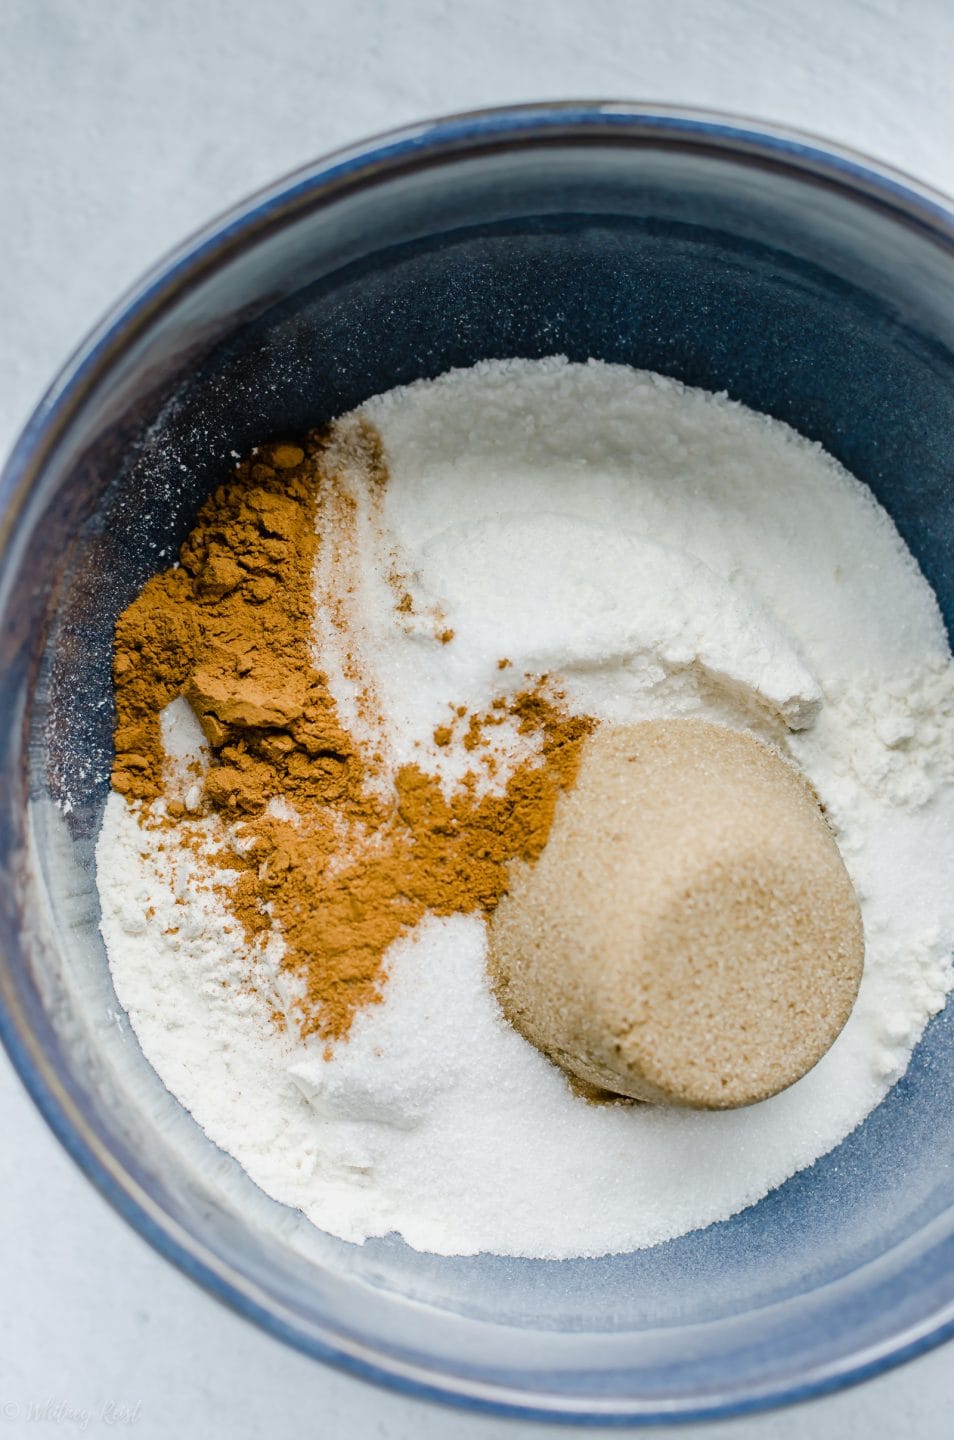 A mixing bowl filled with flour, sugar, and cinnamon.